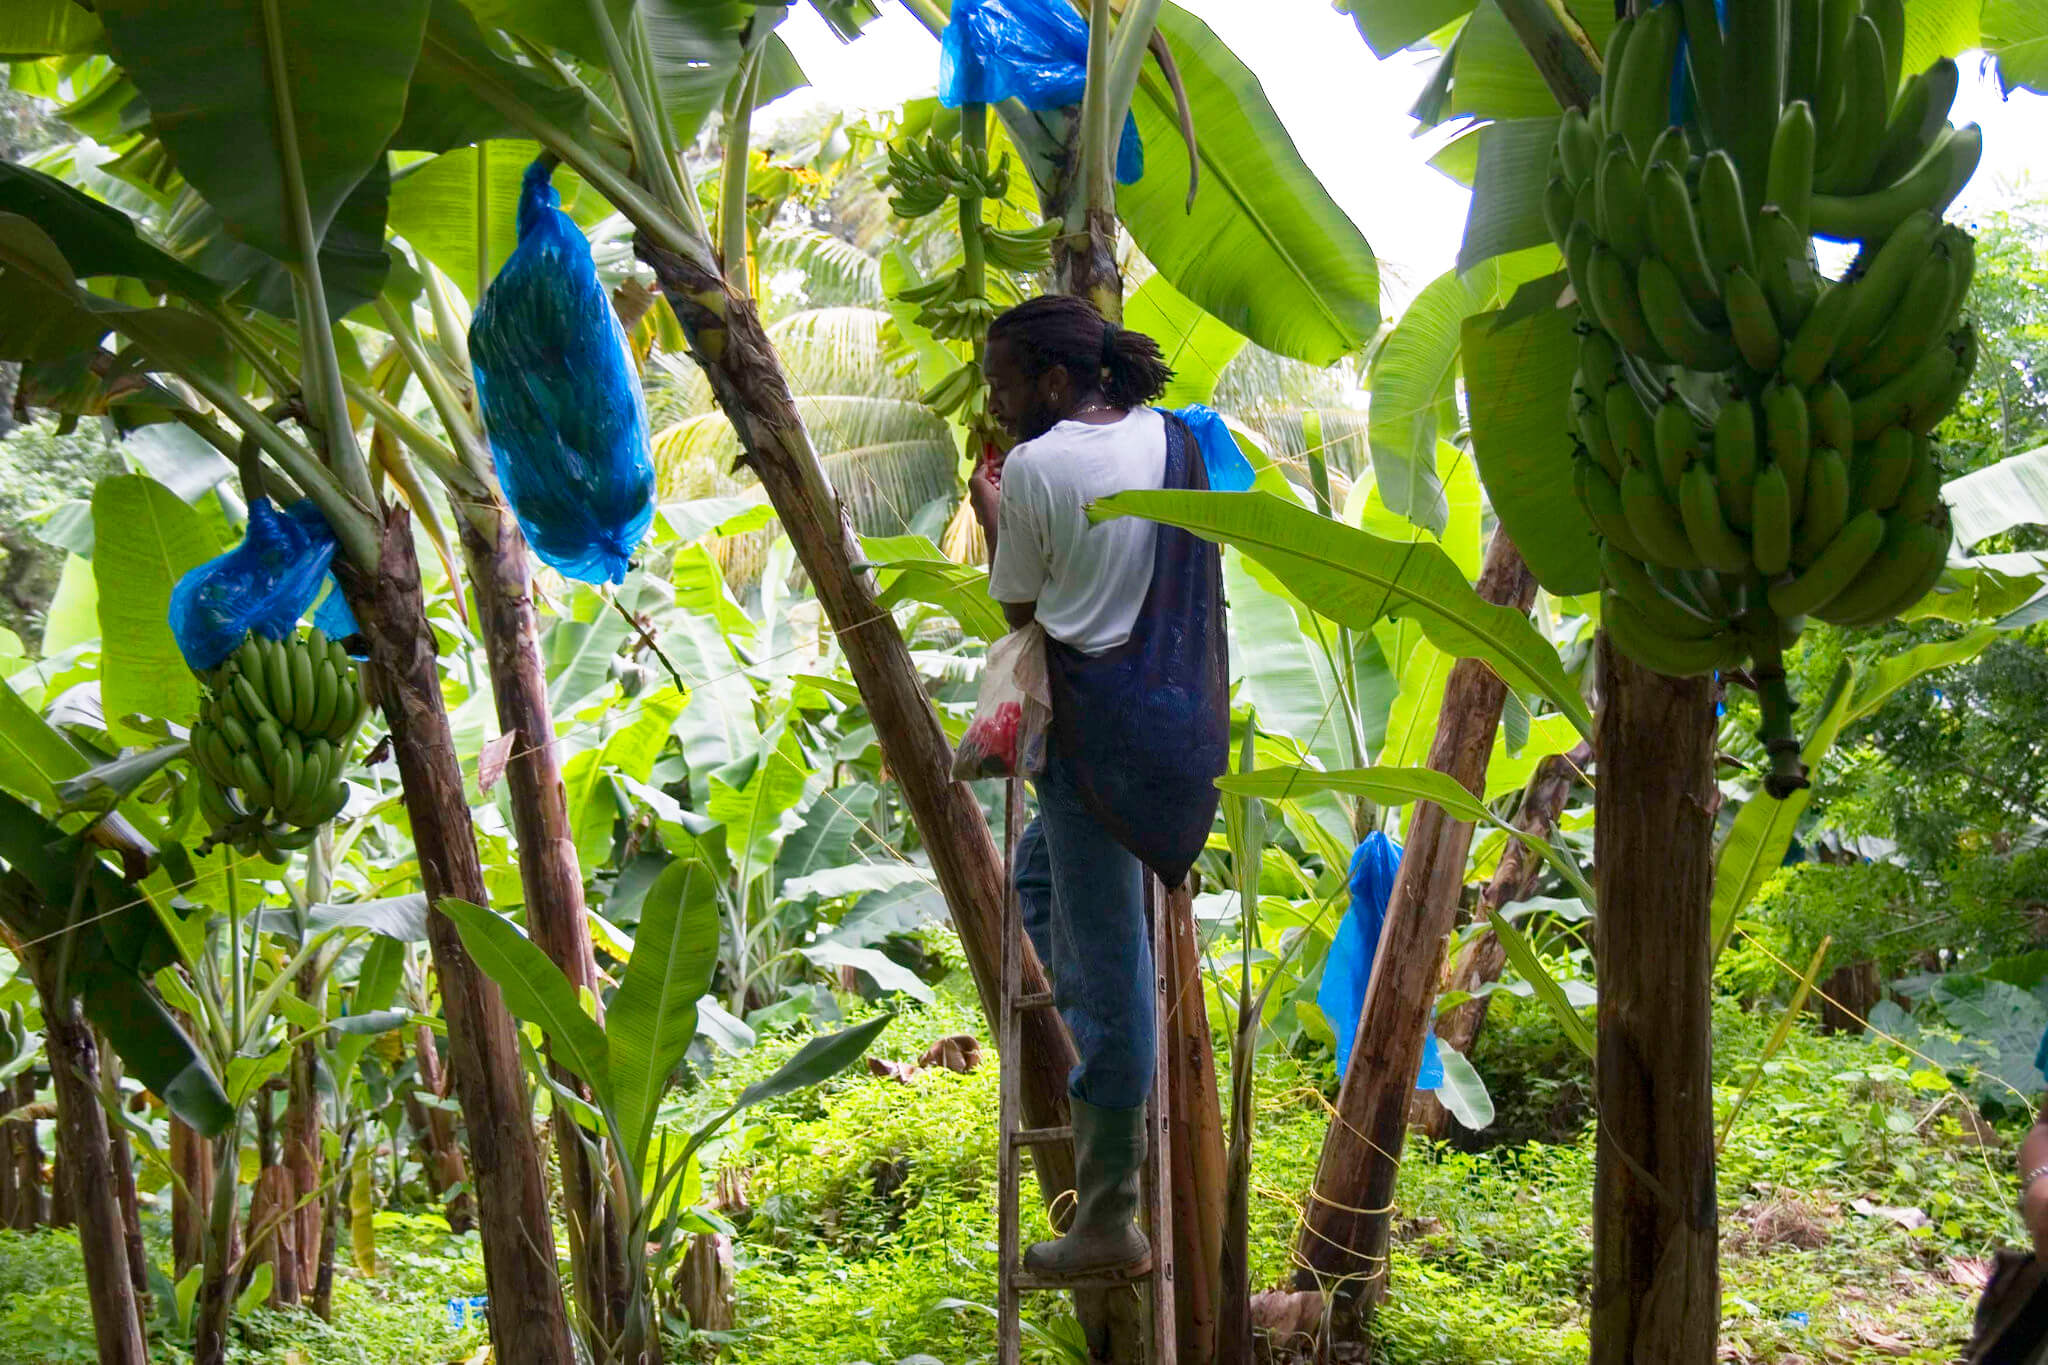 All About Bananas | Producers, Where They're Grown & Why They Matter